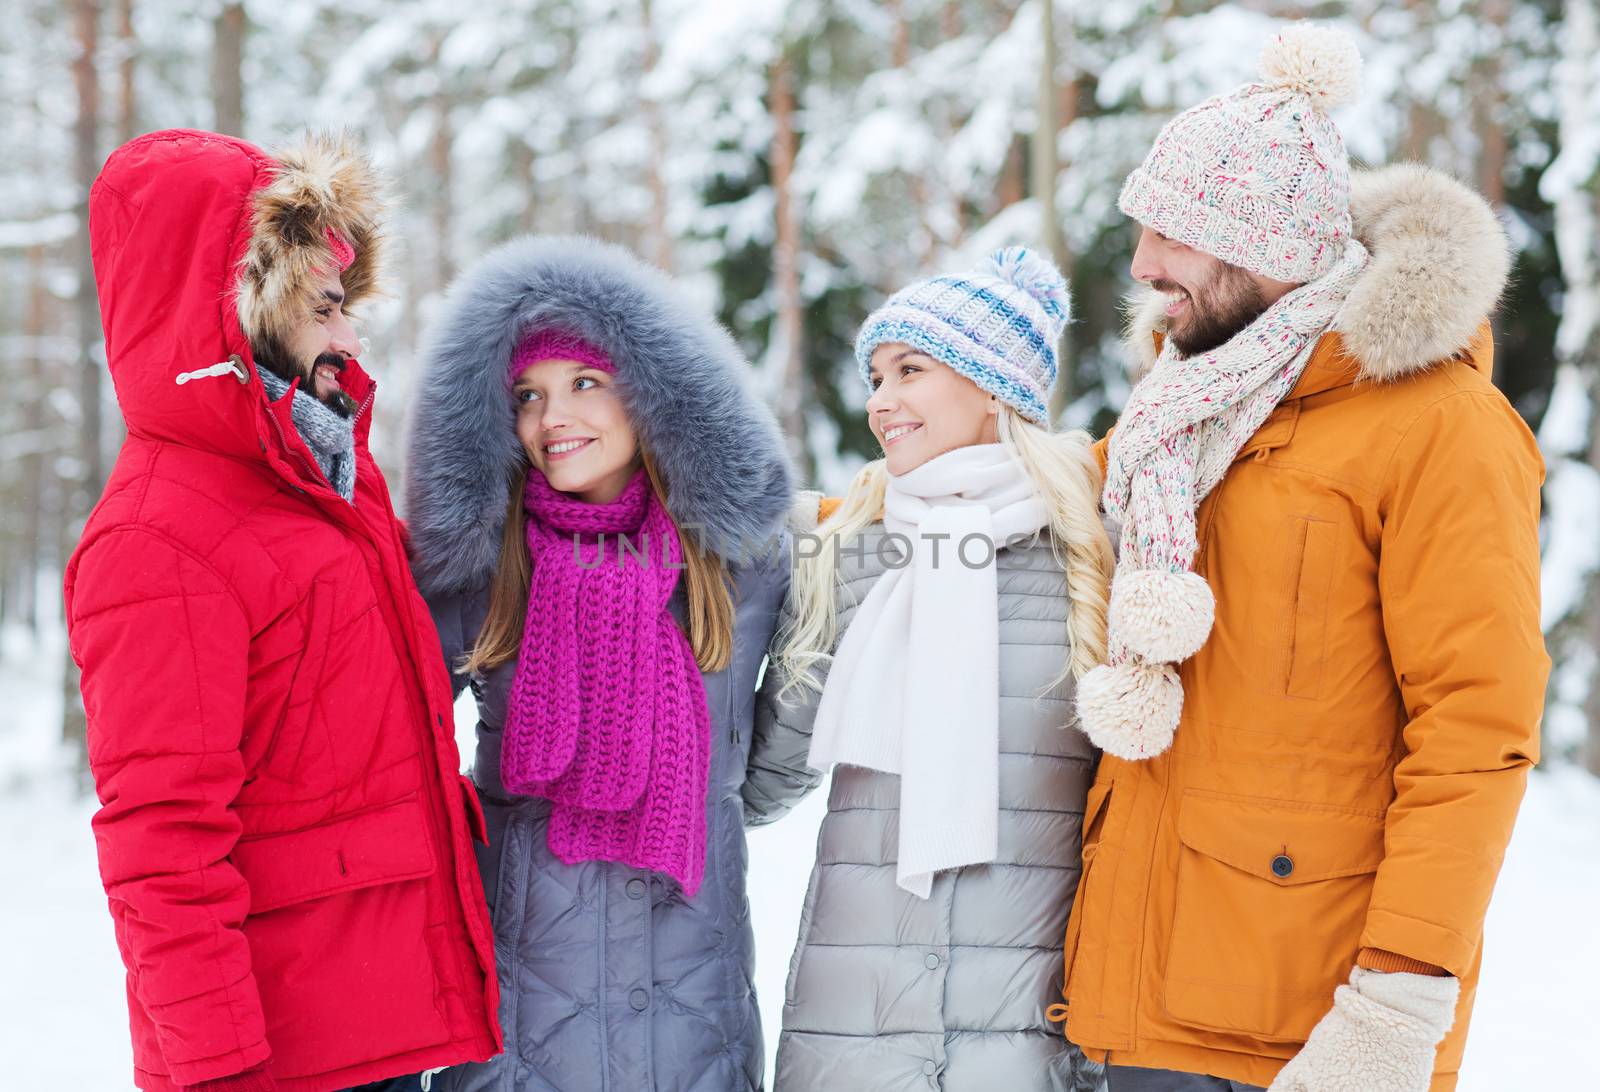 group of smiling men and women in winter forest by dolgachov